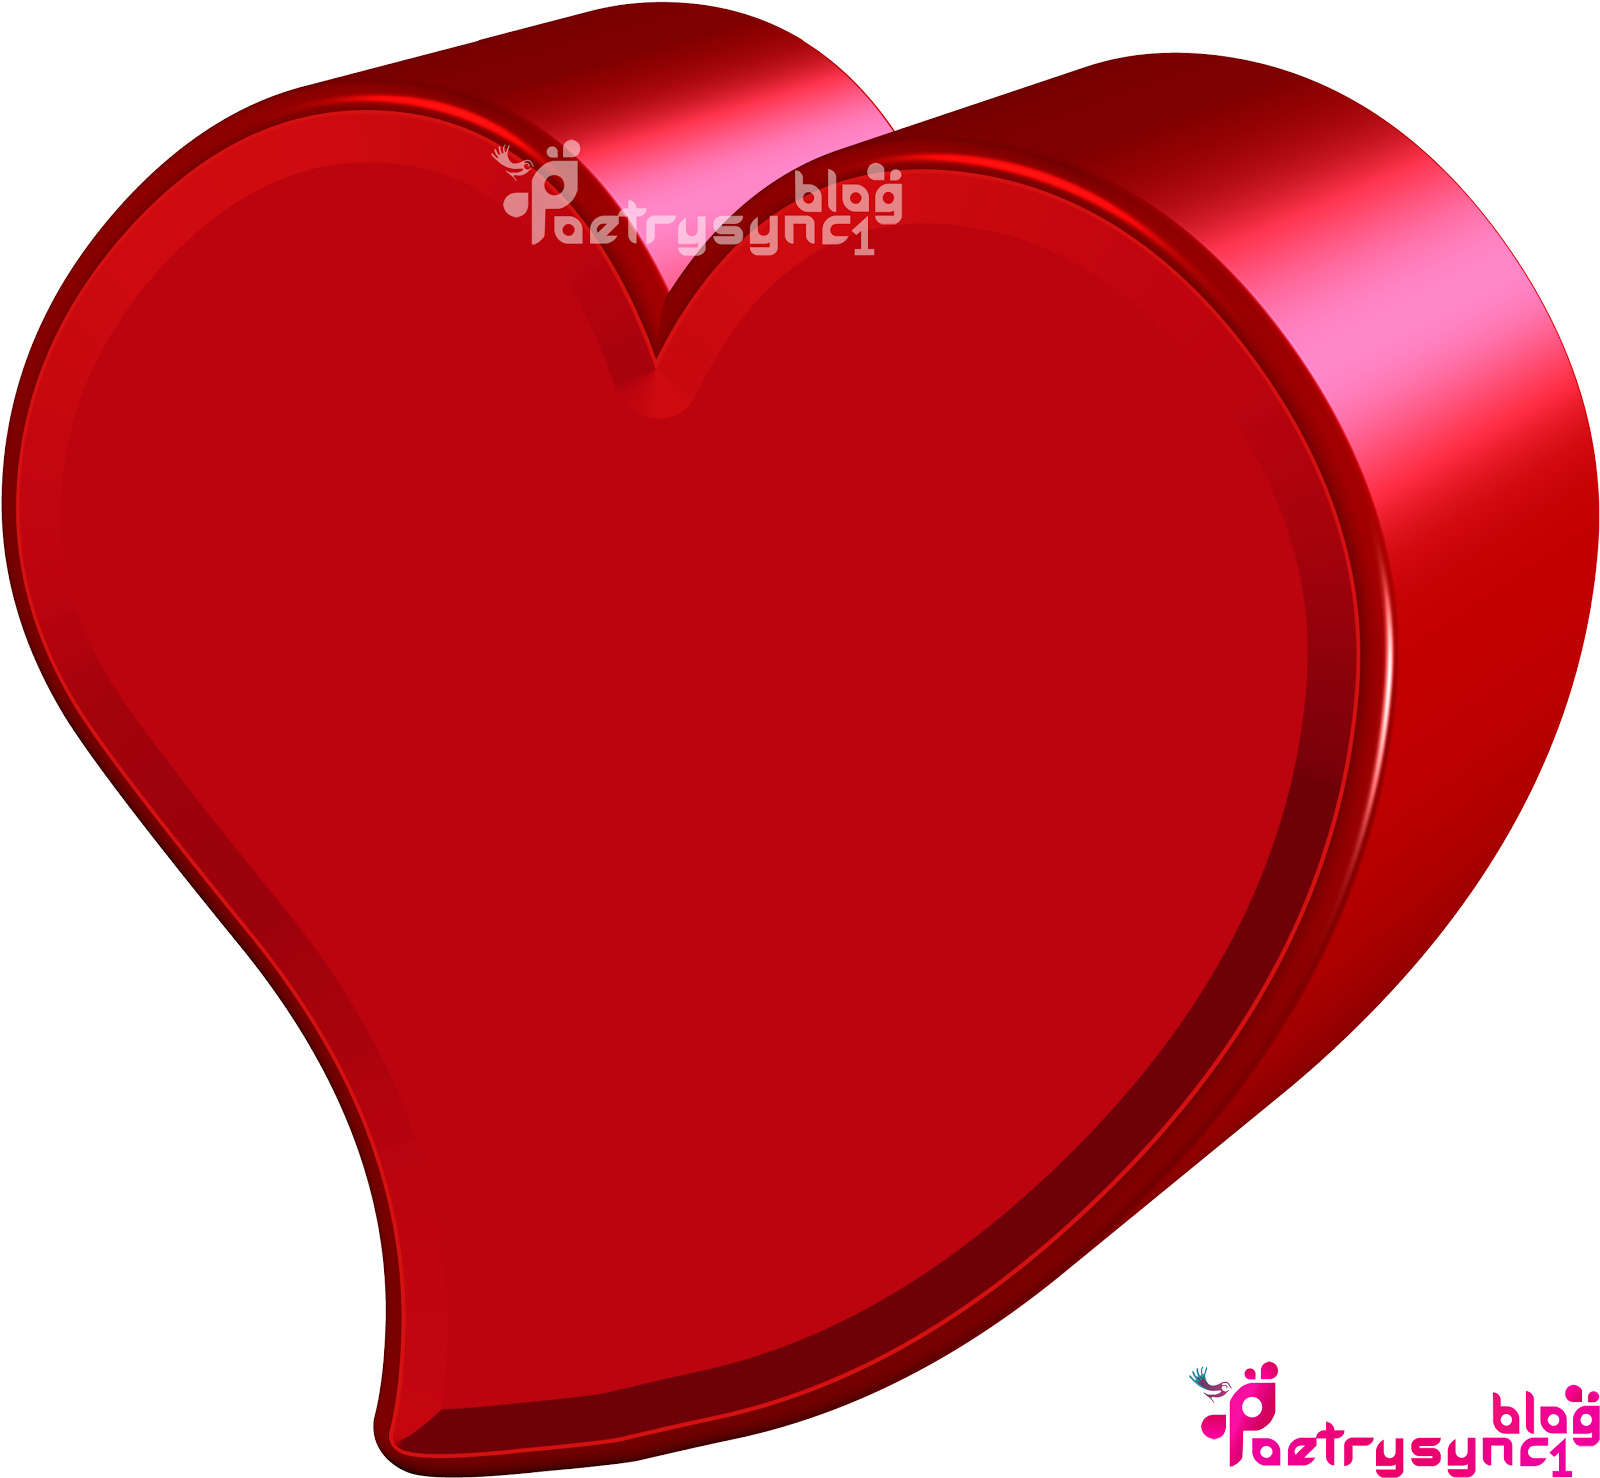 Love-3D-Image-Heart-By-Poetrysync1.blog